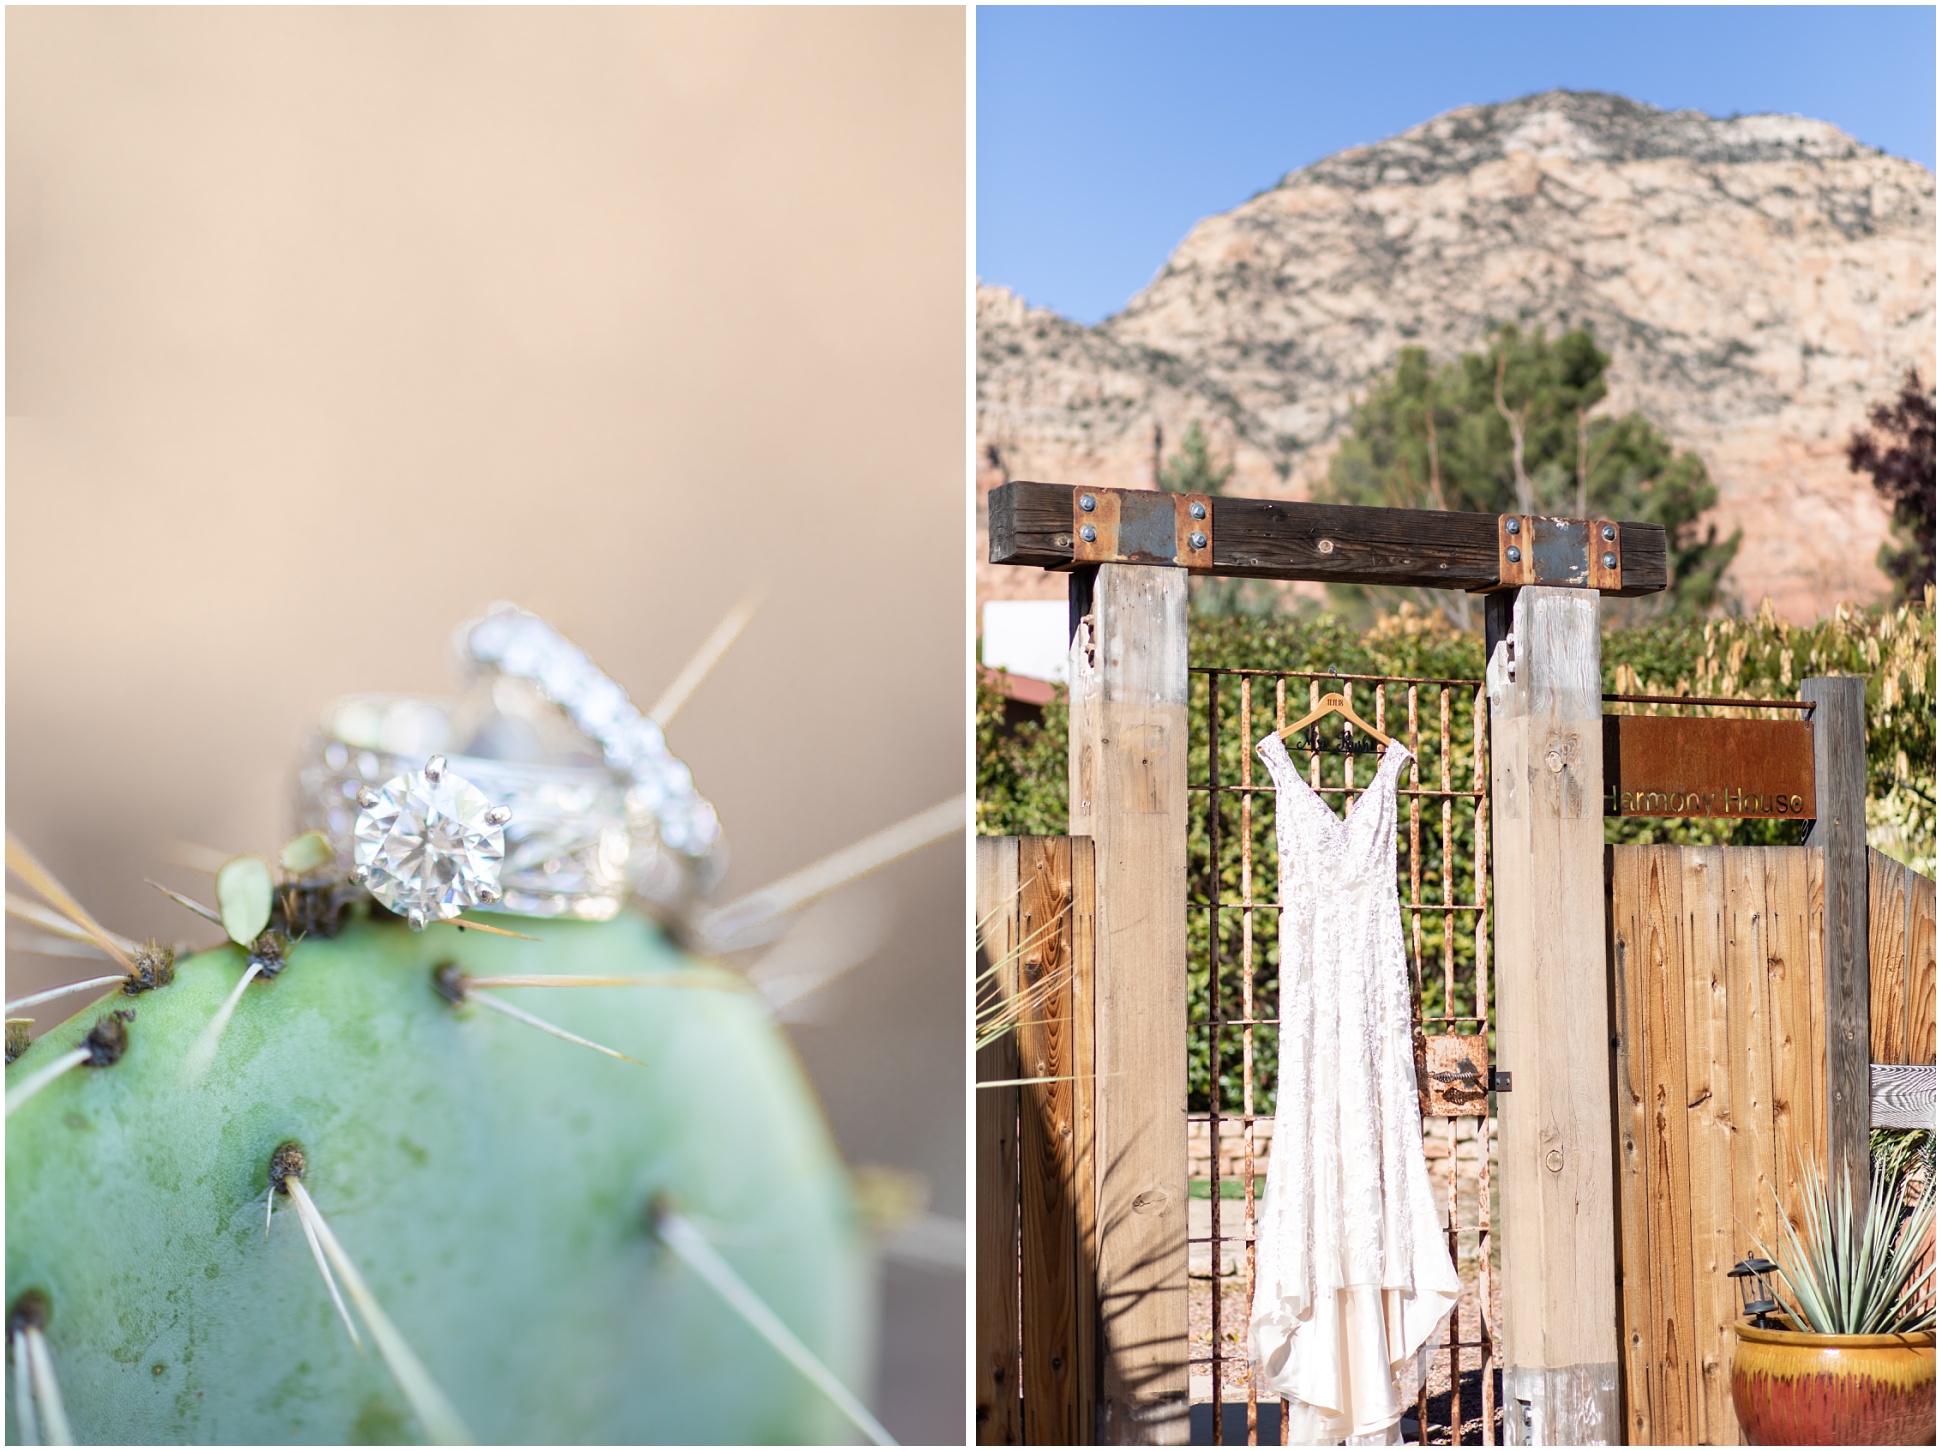 Left Image: Rings on prickly pear cactus, right image: dress hanging on metal gate in front of mountain in sedona